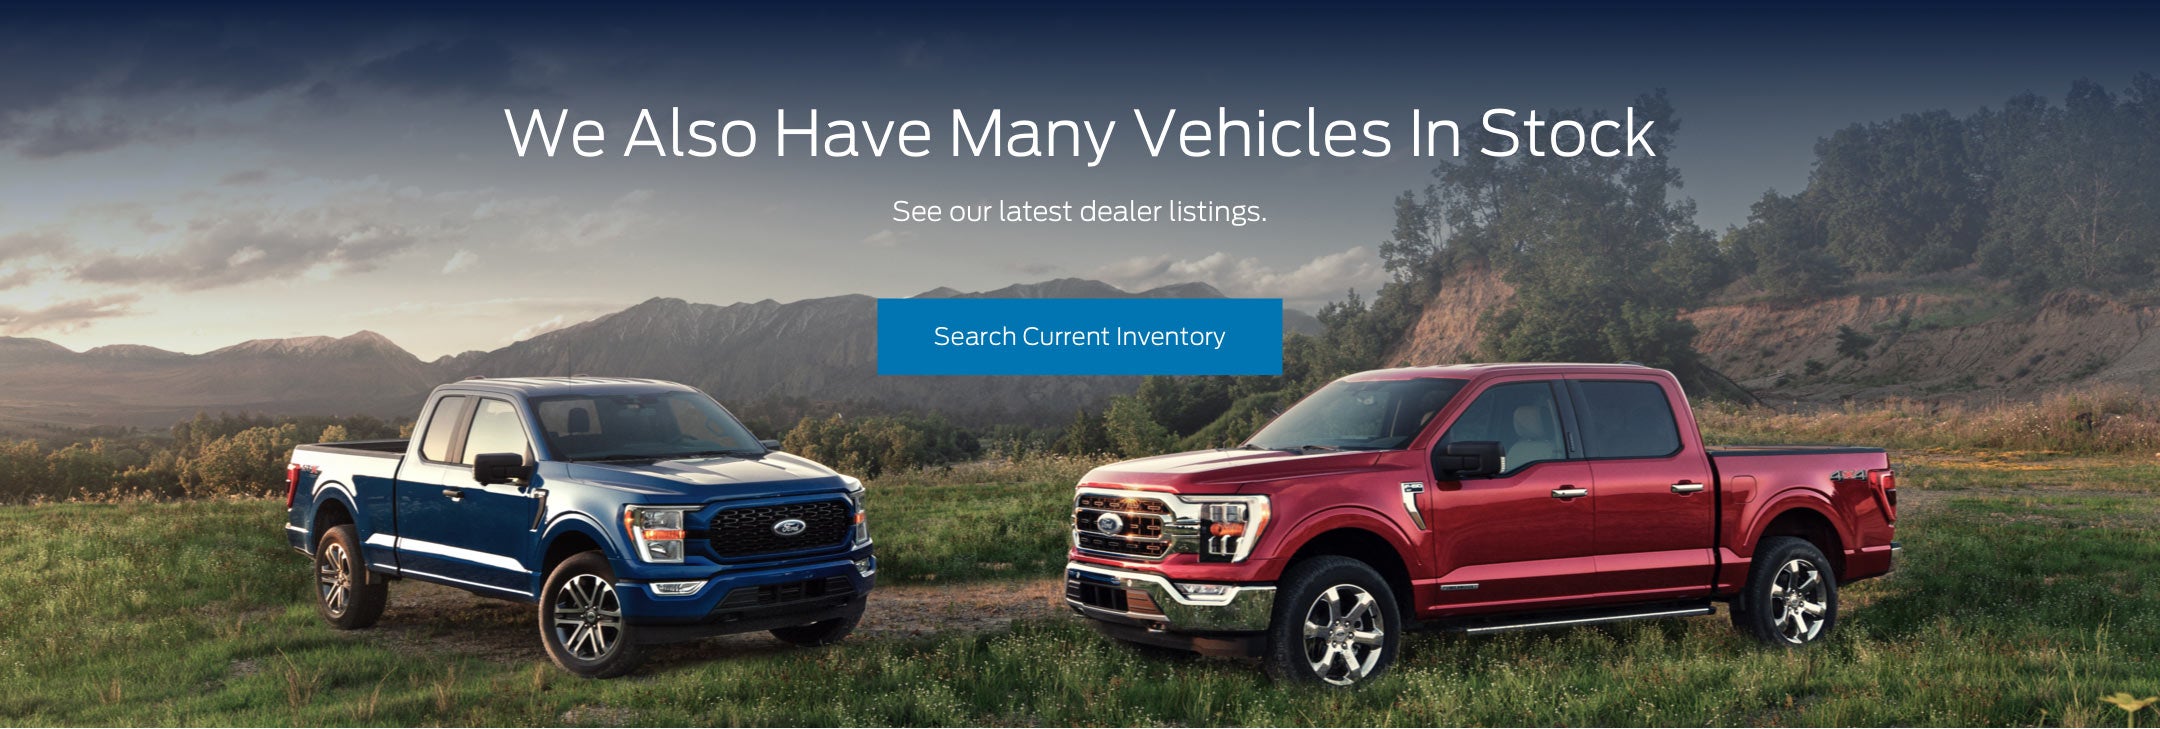 Ford vehicles in stock | Pierre Ford of Lynnwood in Lynnwood WA